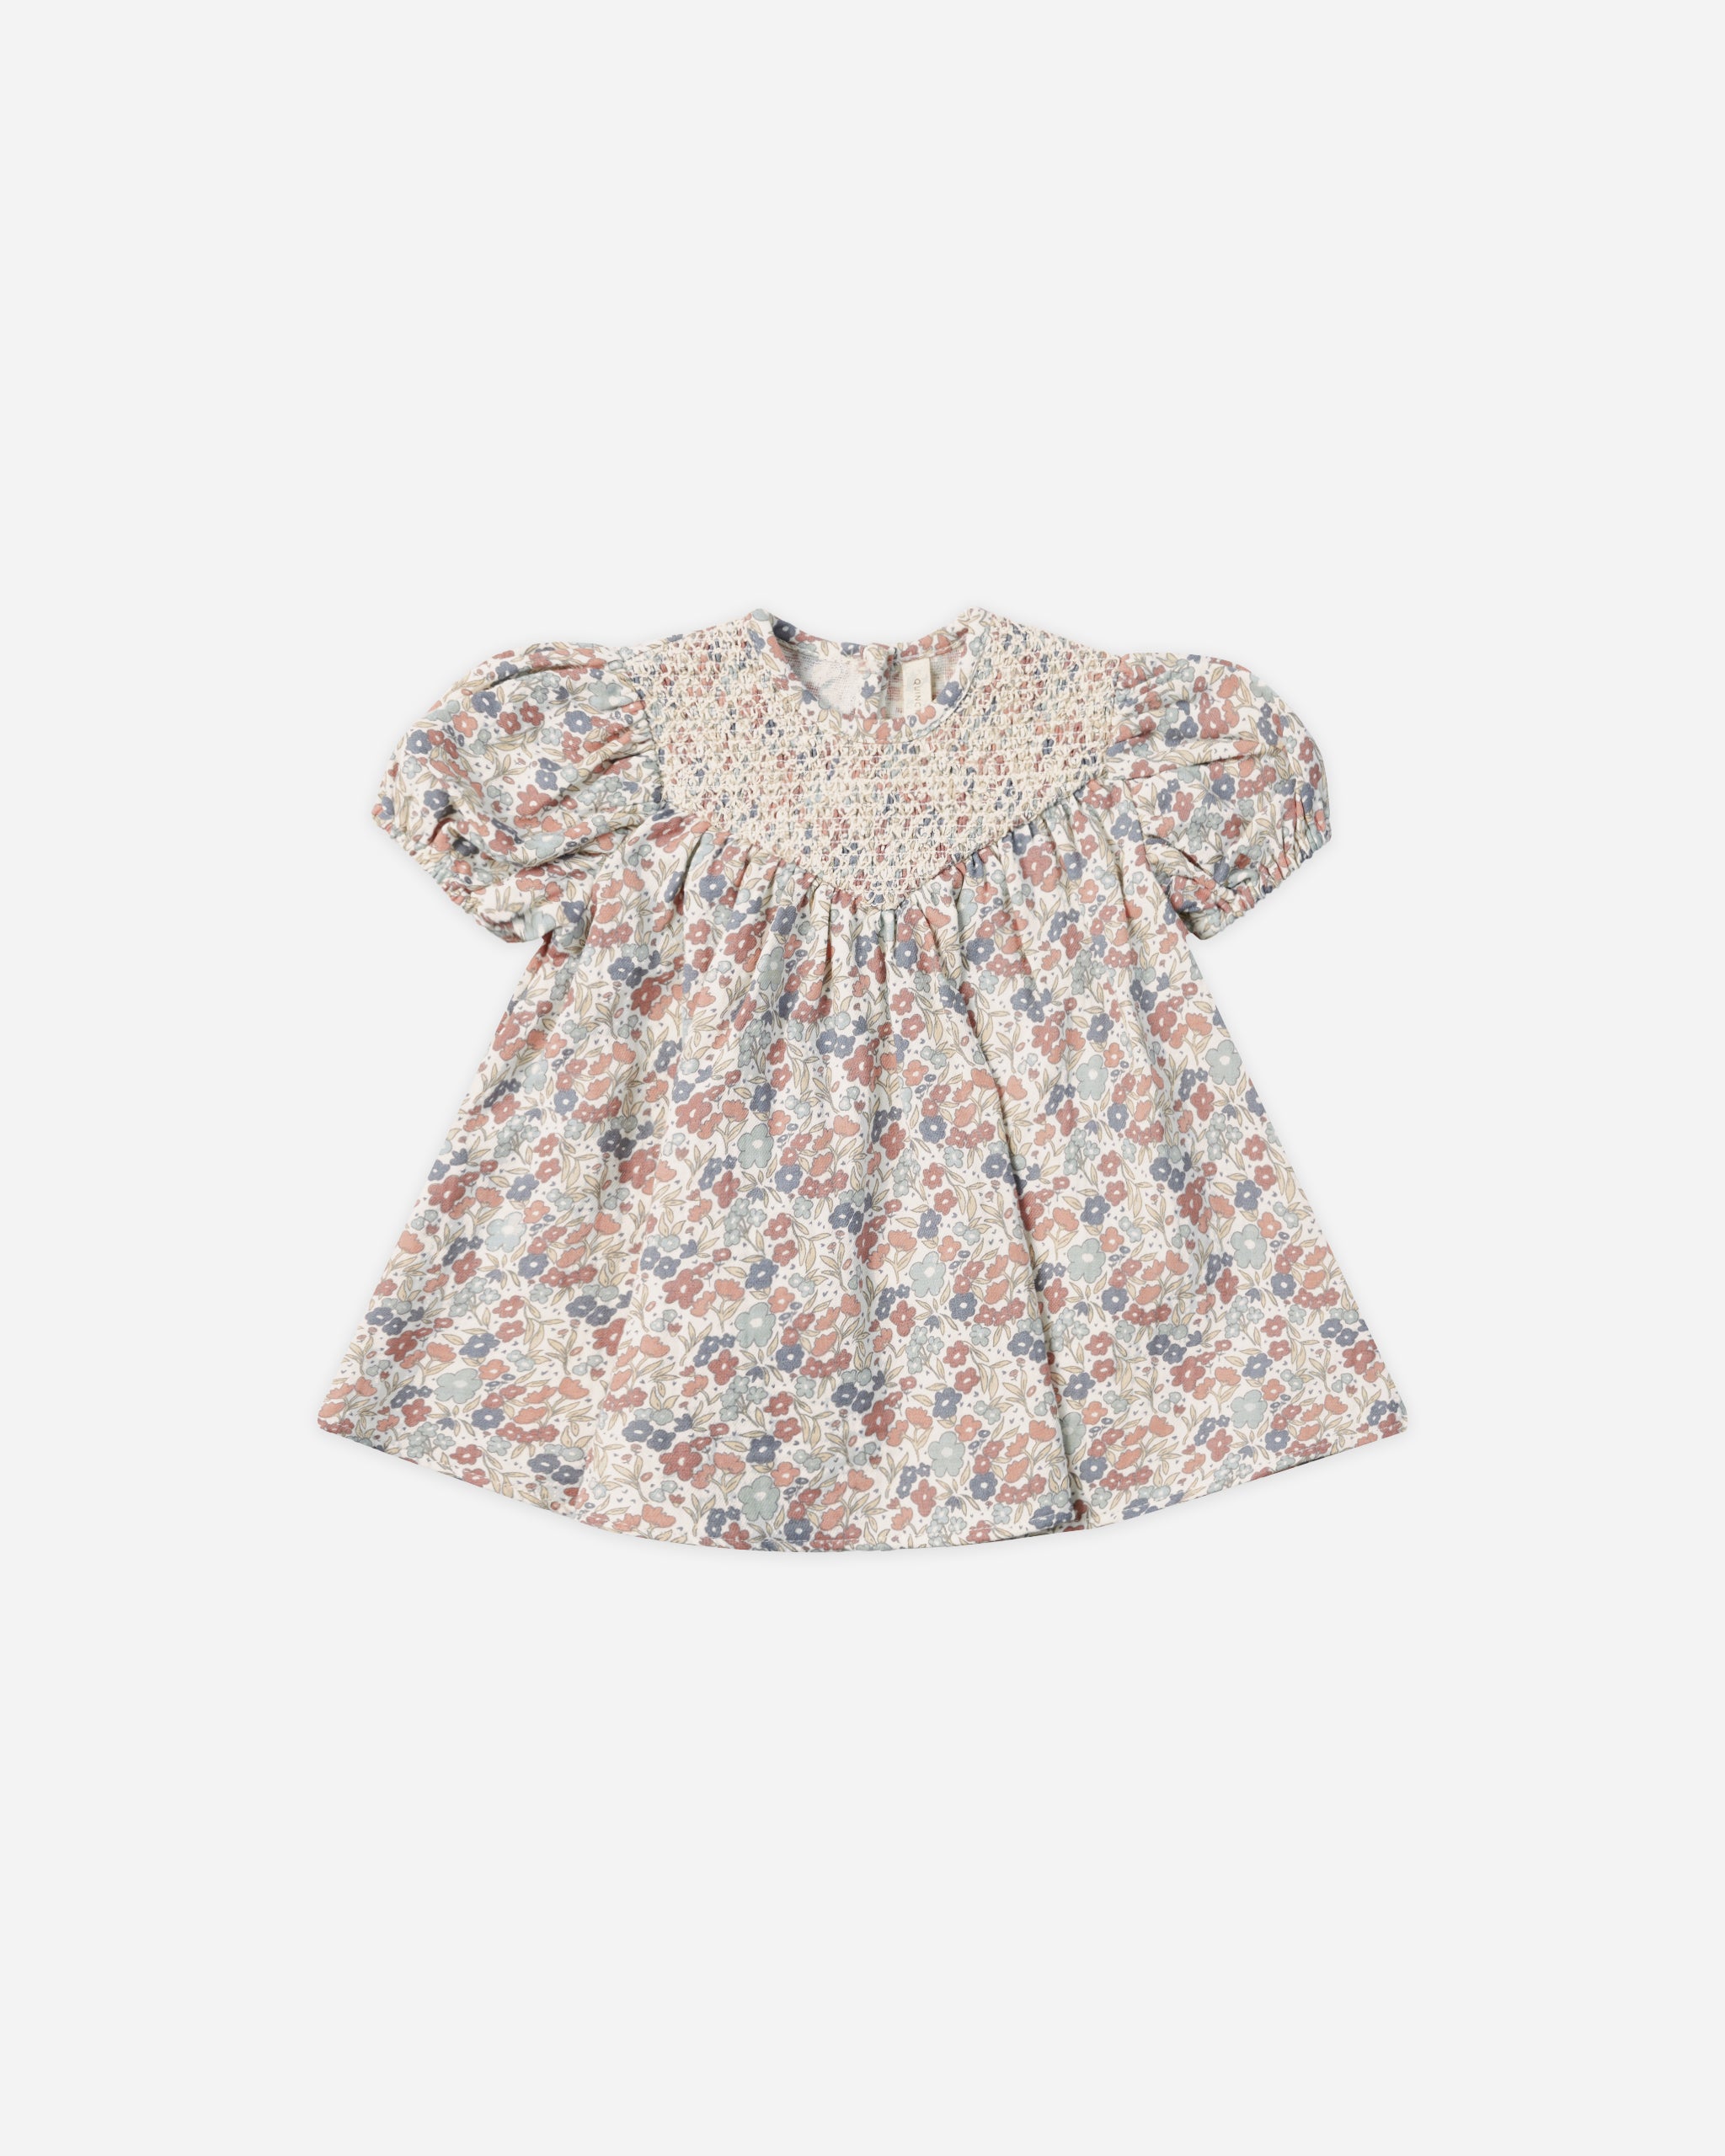 Carina Dress || Bloom - Rylee + Cru | Kids Clothes | Trendy Baby Clothes | Modern Infant Outfits |